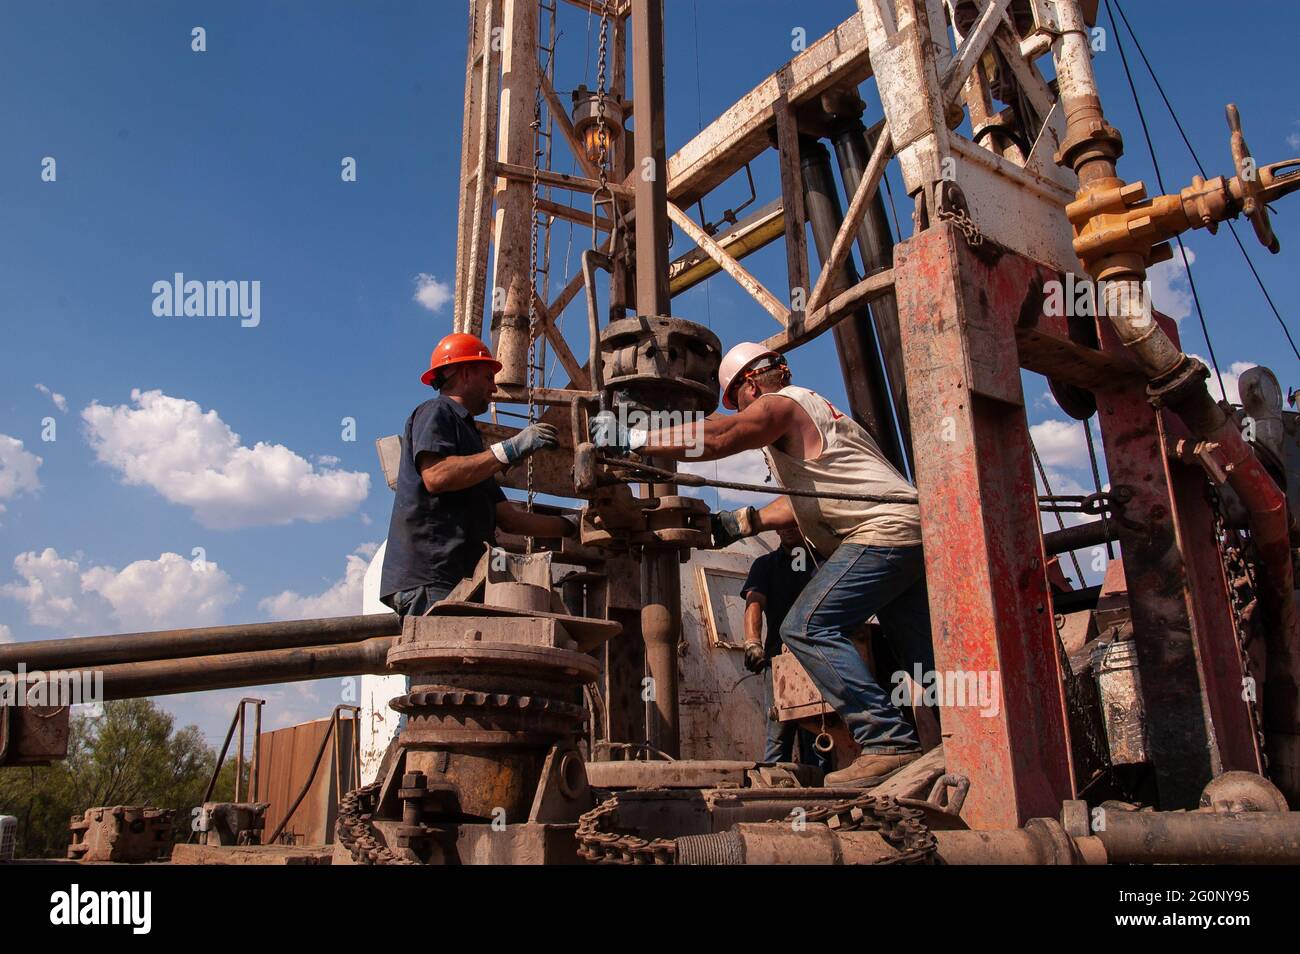 Roughnecks add a section of pipe to an oil well in the Elgin Field along the Oklahoma and Texas border.. High-pressure fracturing opened up new and old oil fields in Texas and helped move the country away from using coal. Stock Photo